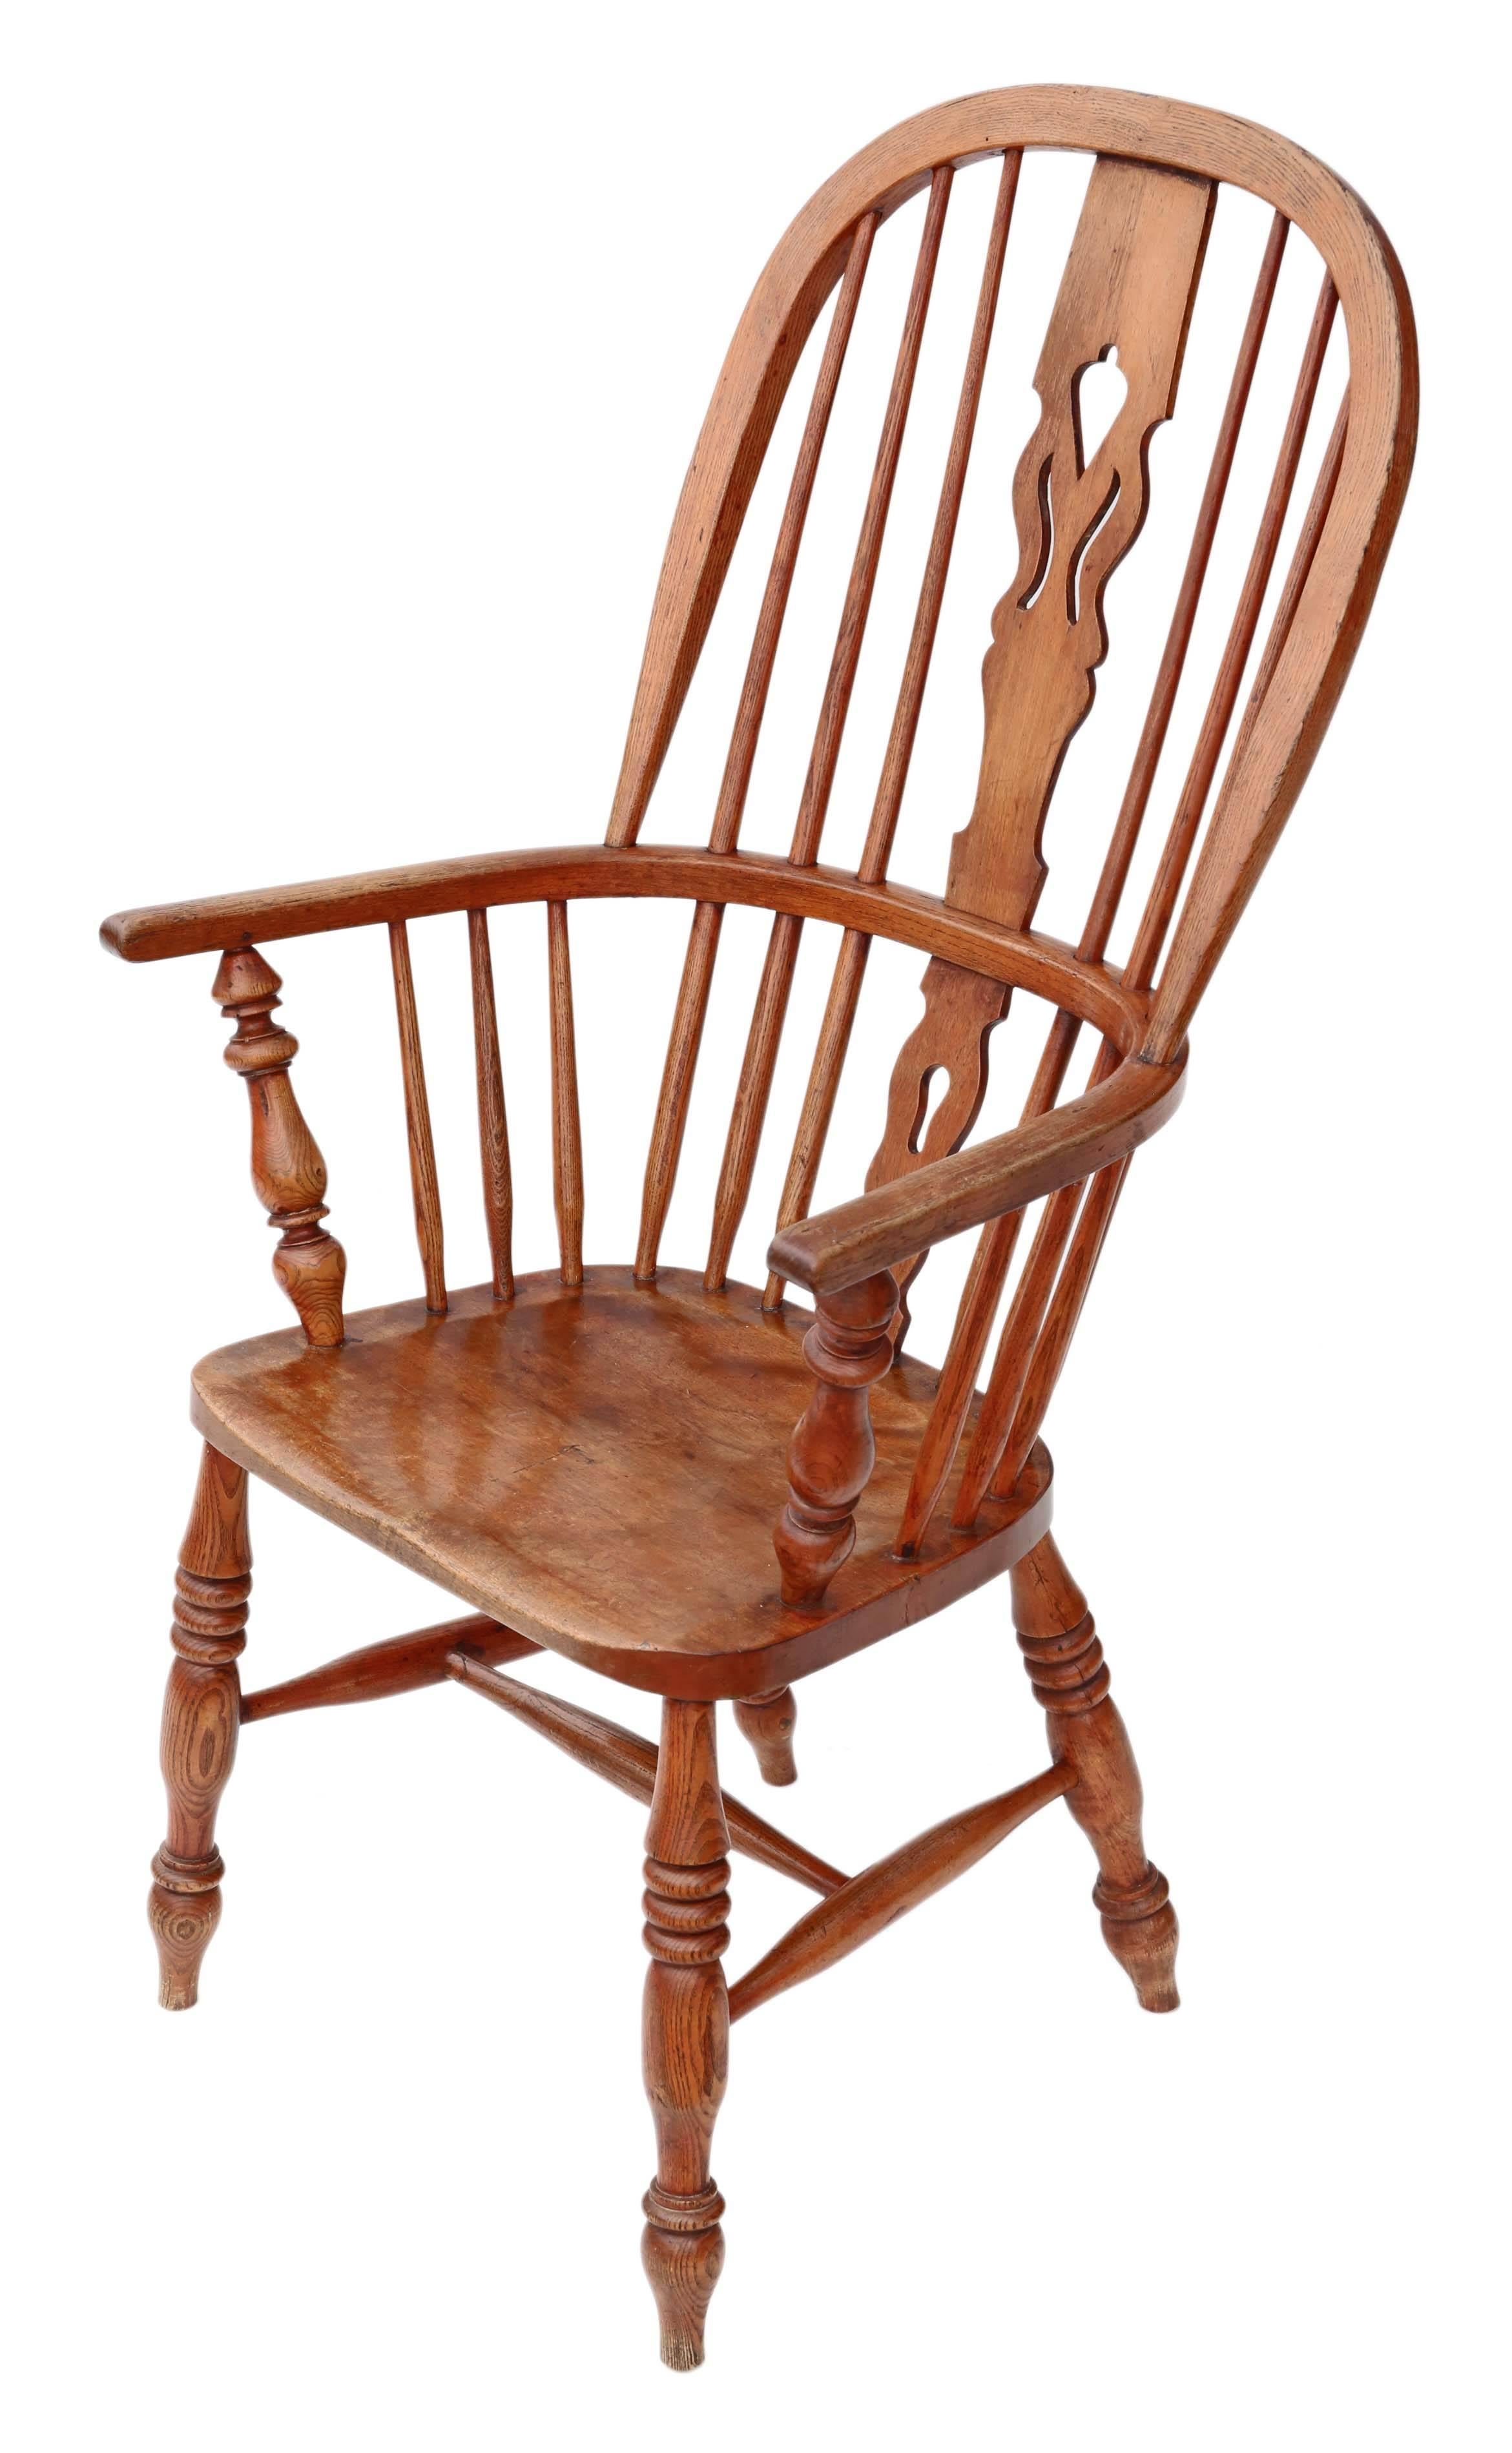 Antique Victorian circa 1840 ash and elm windsor armchair.

Solid, no loose joints and no woodworm. Full of age, character and charm. Very decorative chair with a lovely warm mellow color.

Would look great in the right location!

Overall